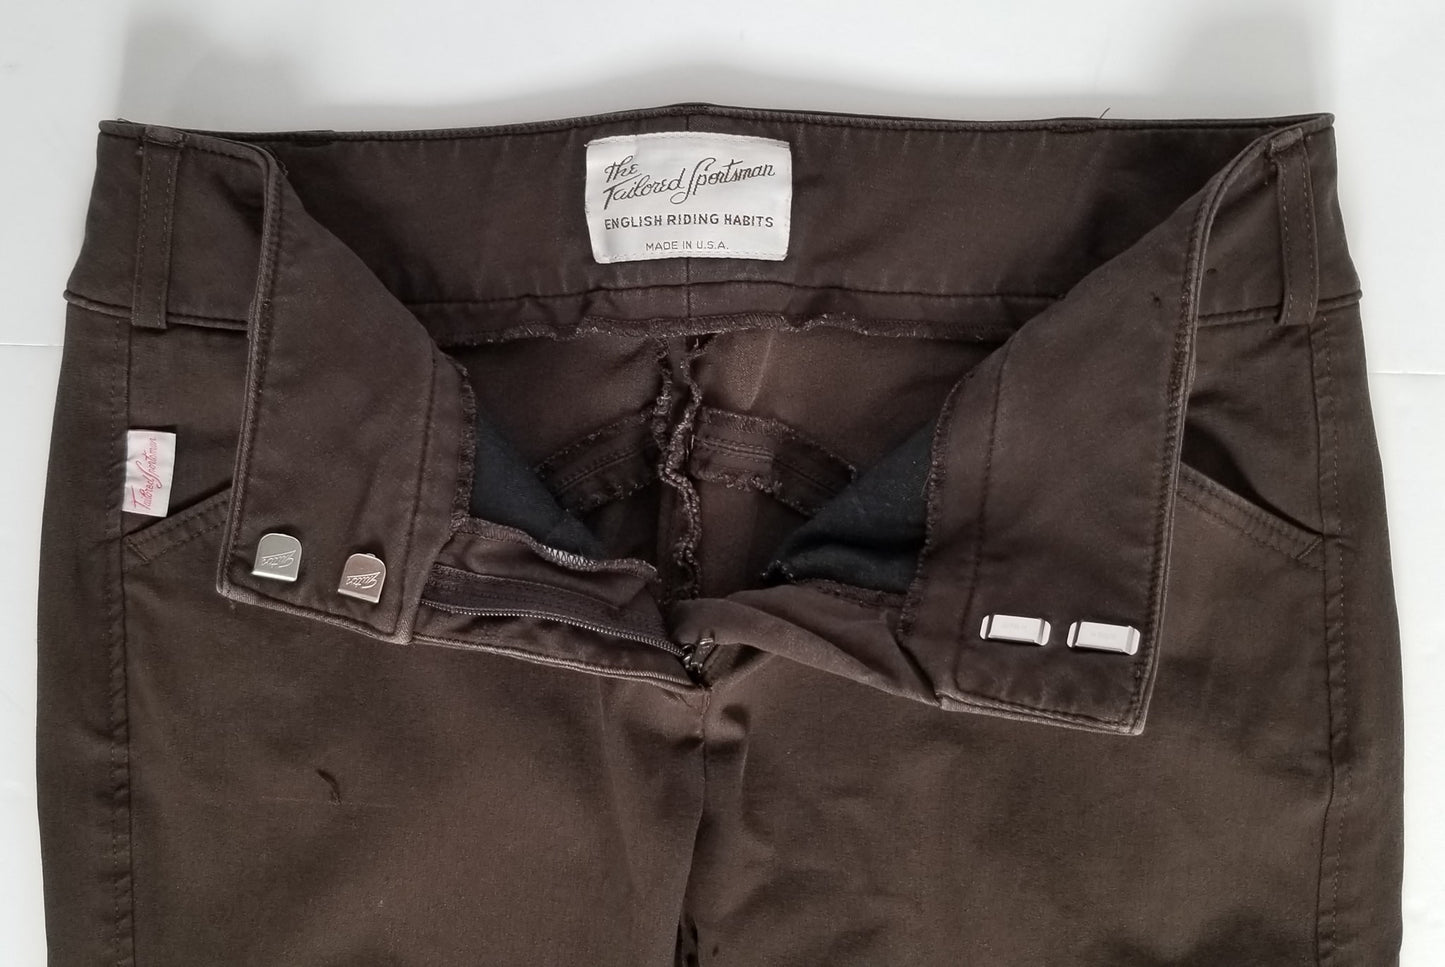 Tailored Sportsman Trophy Hunter Breeches - Brown - 28R